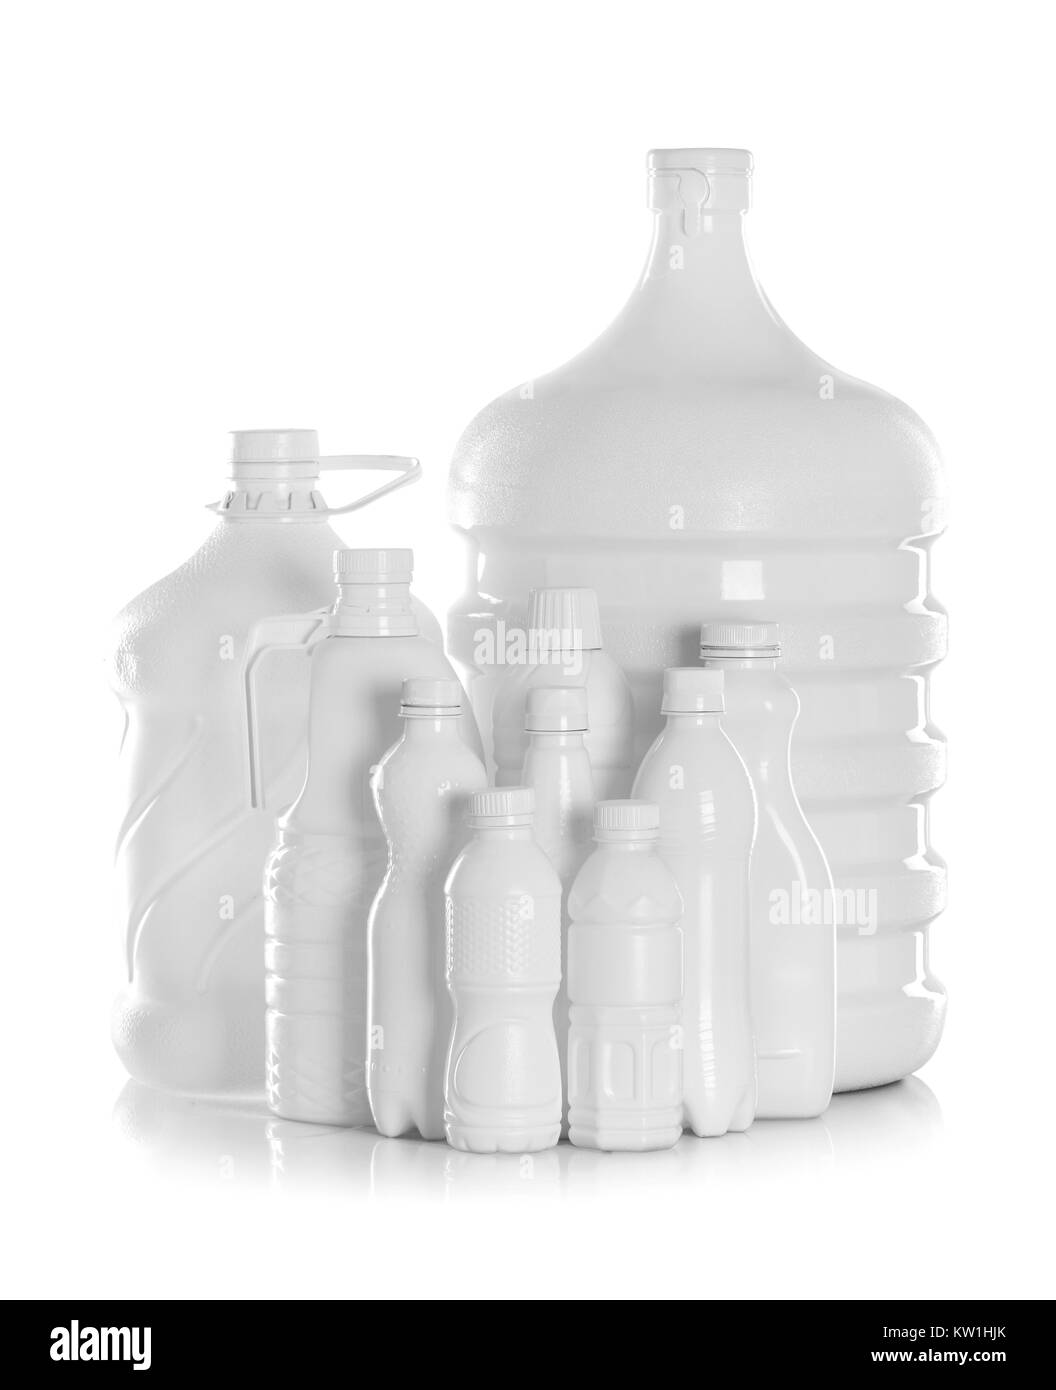 group bottle of water packaging Stock Photo